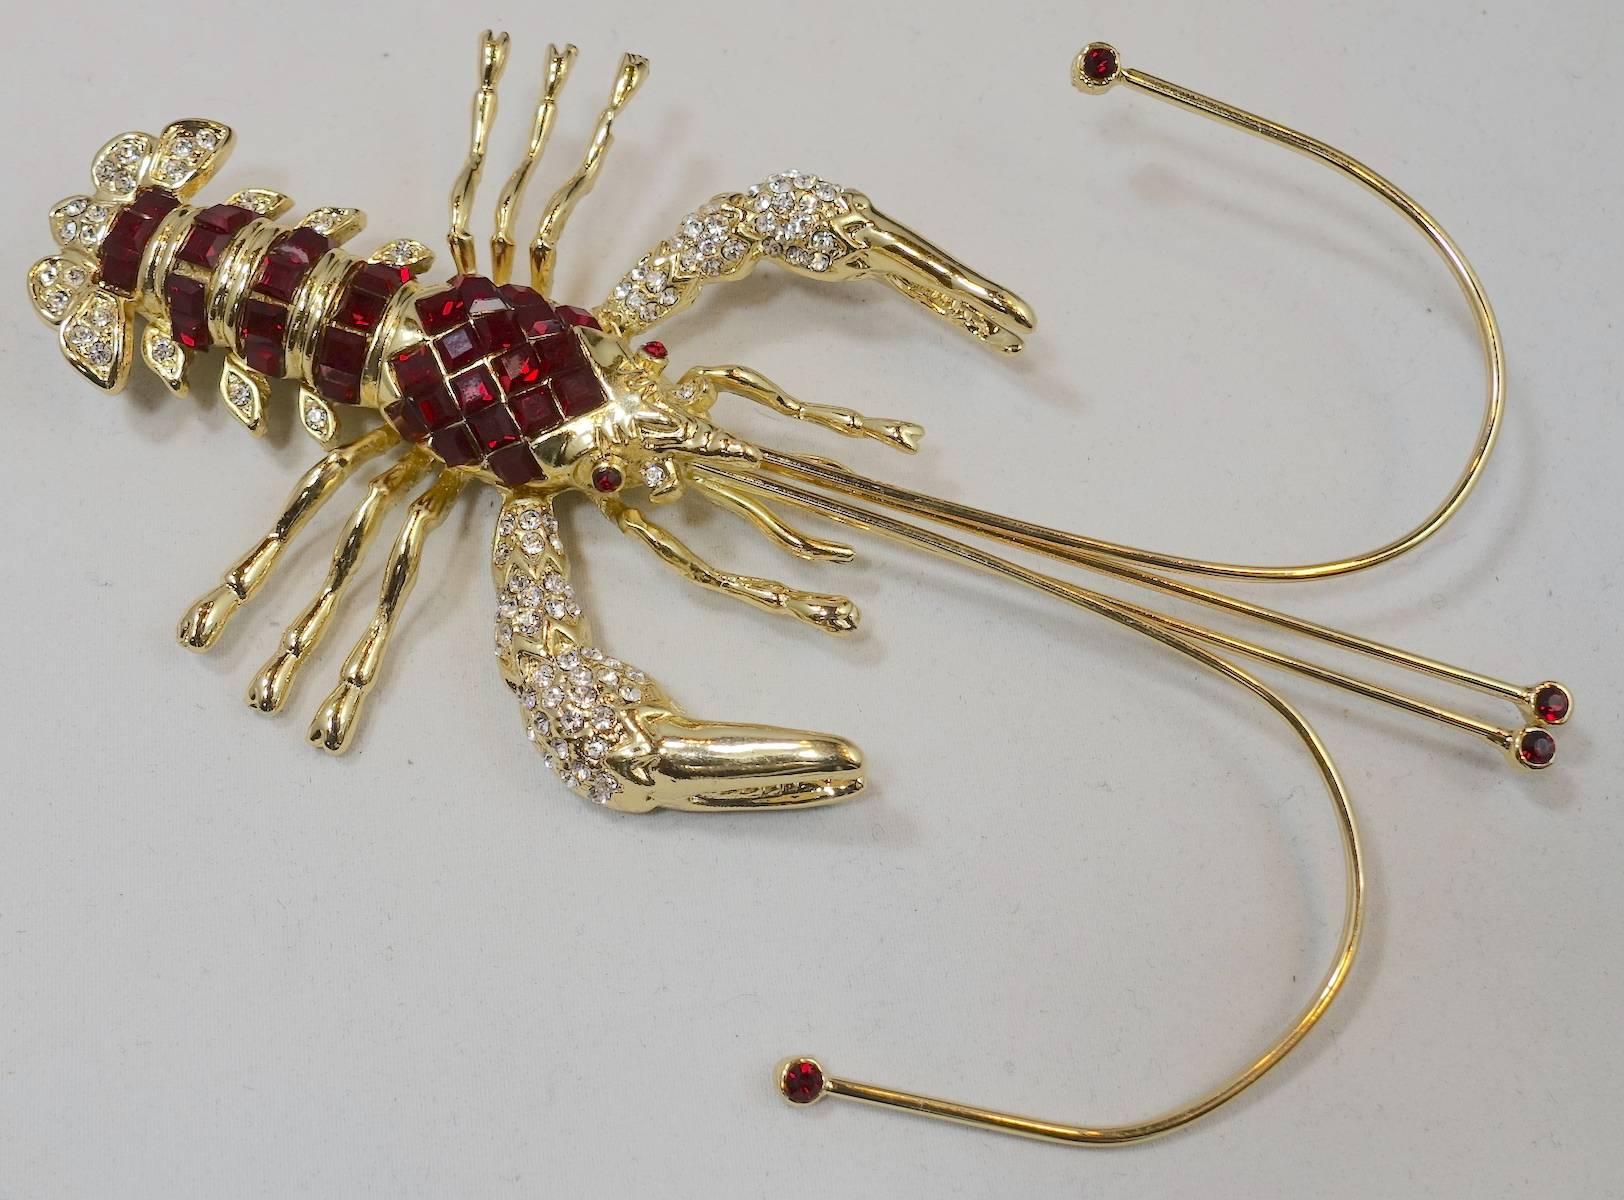 I love lobster pins and this is no exception. It is designed with red square inset rhinestones on the body. It is accented with clear crystals on the claws and tail. It is set in a gold tone metal finish and measures a whopping 6” x 4-1/4”. It is in